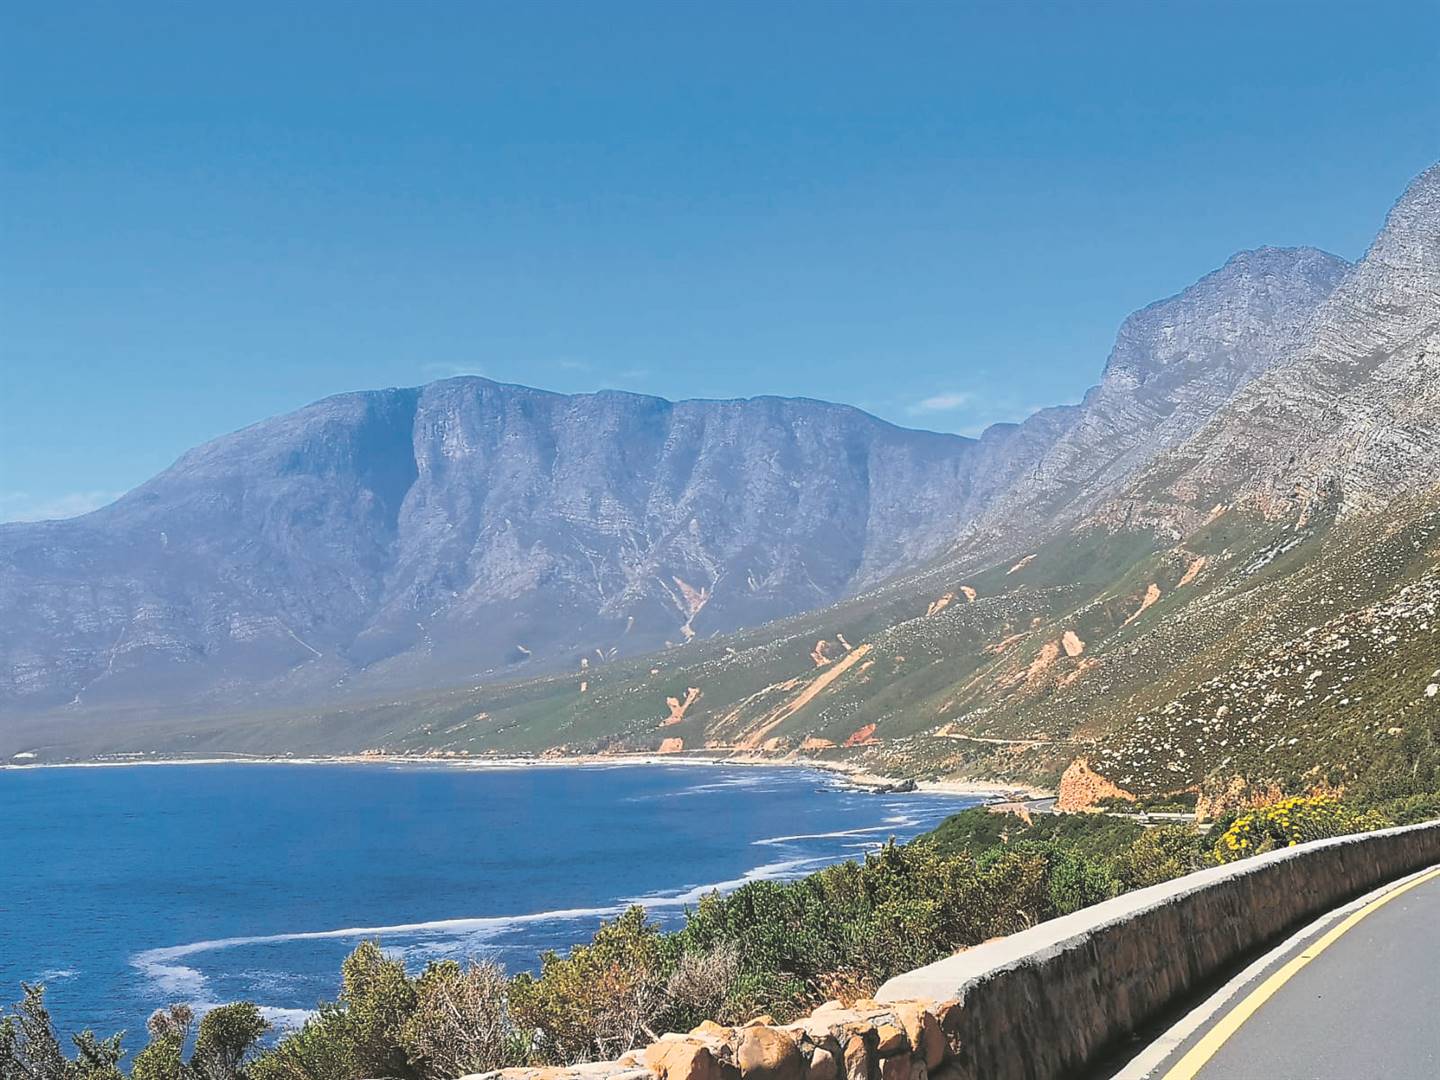 More than two months after severe weather damaged sections of Clarence Drive (R44), the scenic coastal road has reopened to traffic.